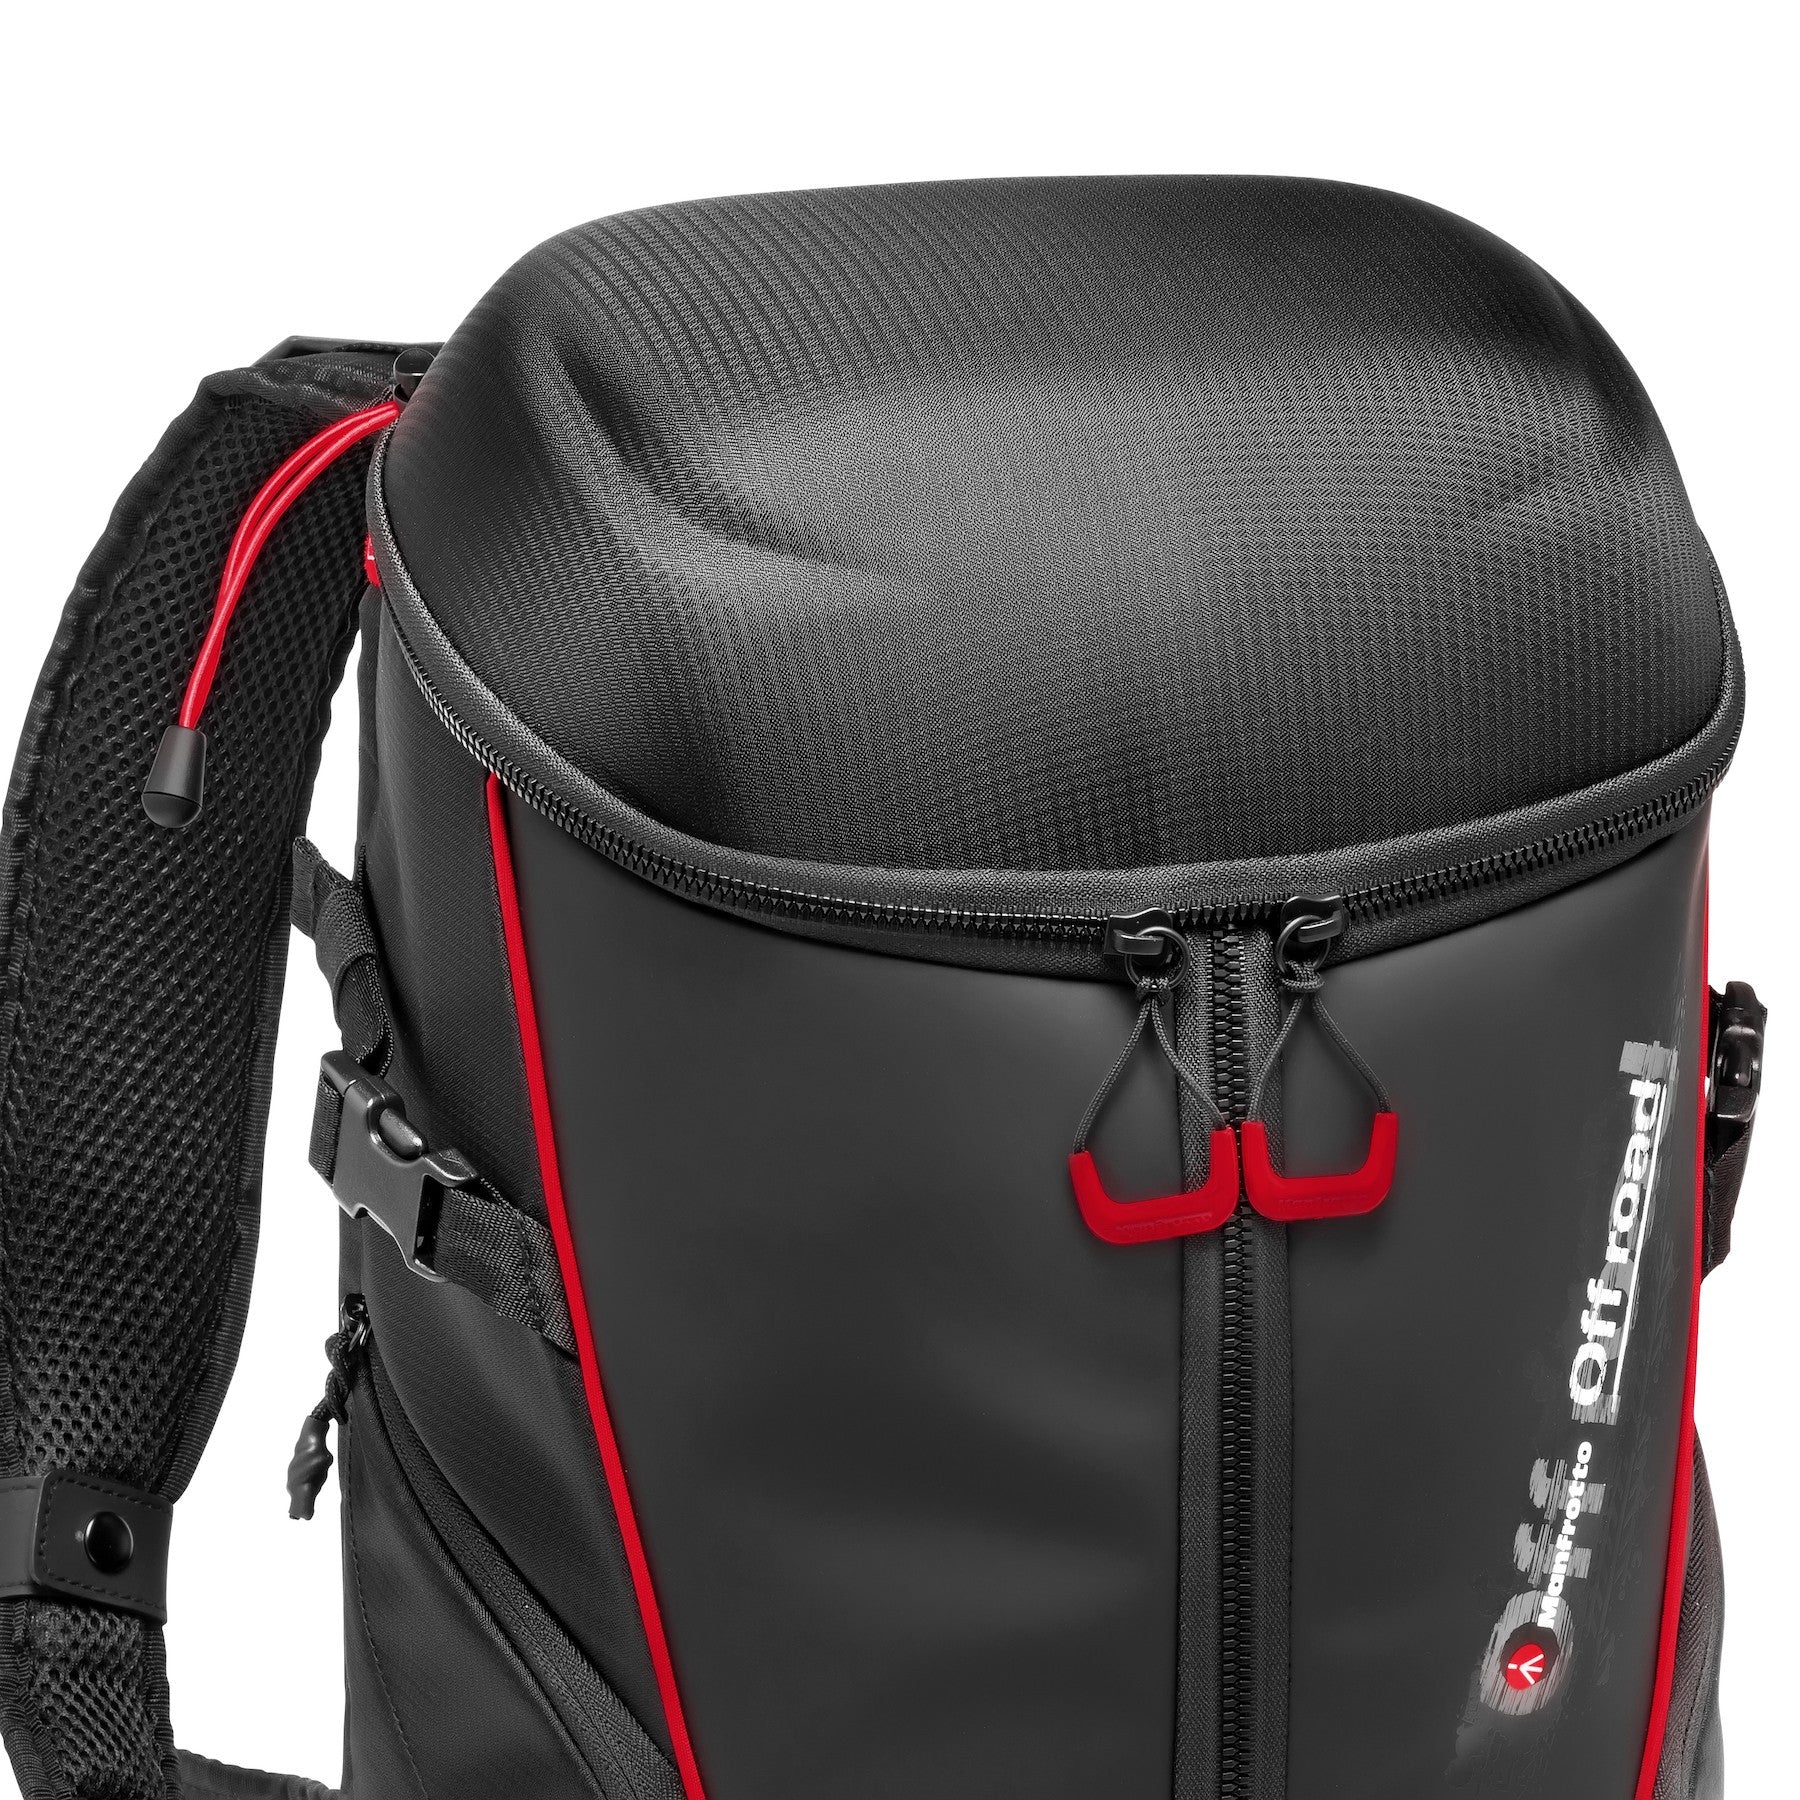 Manfrotto Off Road Stunt Backpack (Black), bags backpacks, Manfrotto - Pictureline  - 4